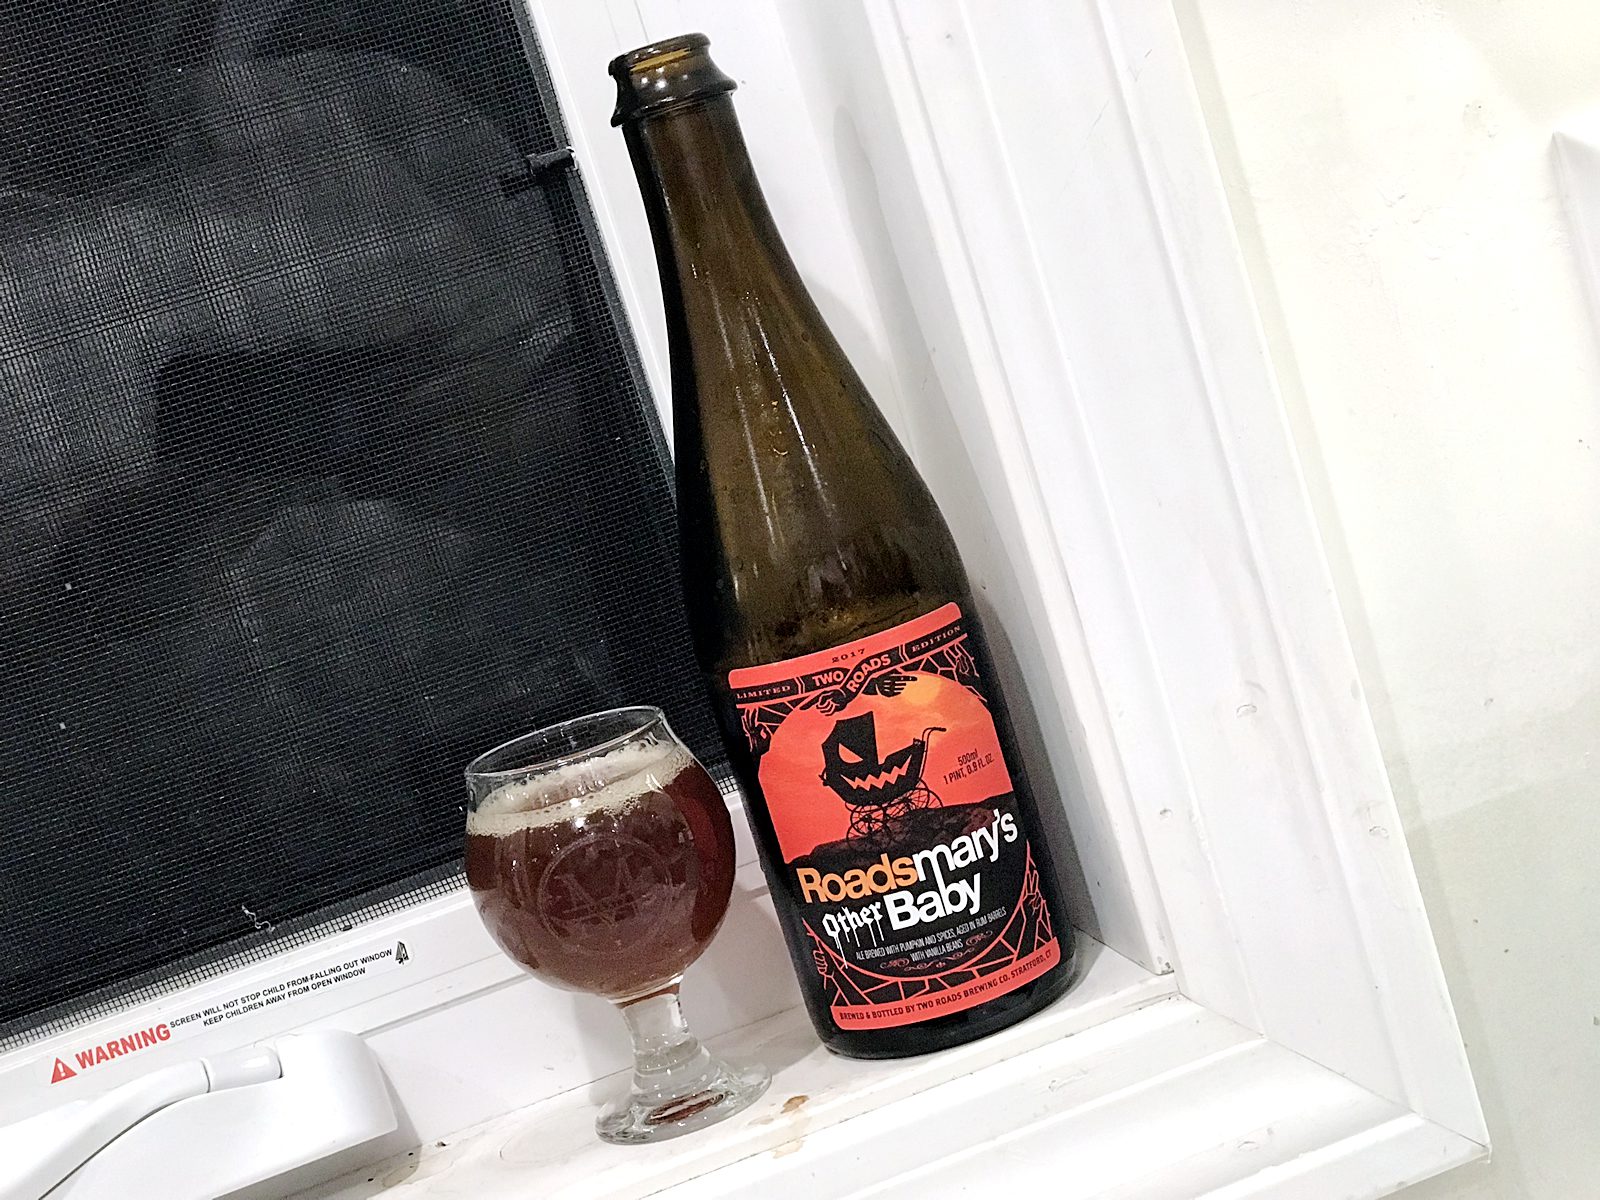 Two Roads Brewing Company: Roadsmary's Other Baby